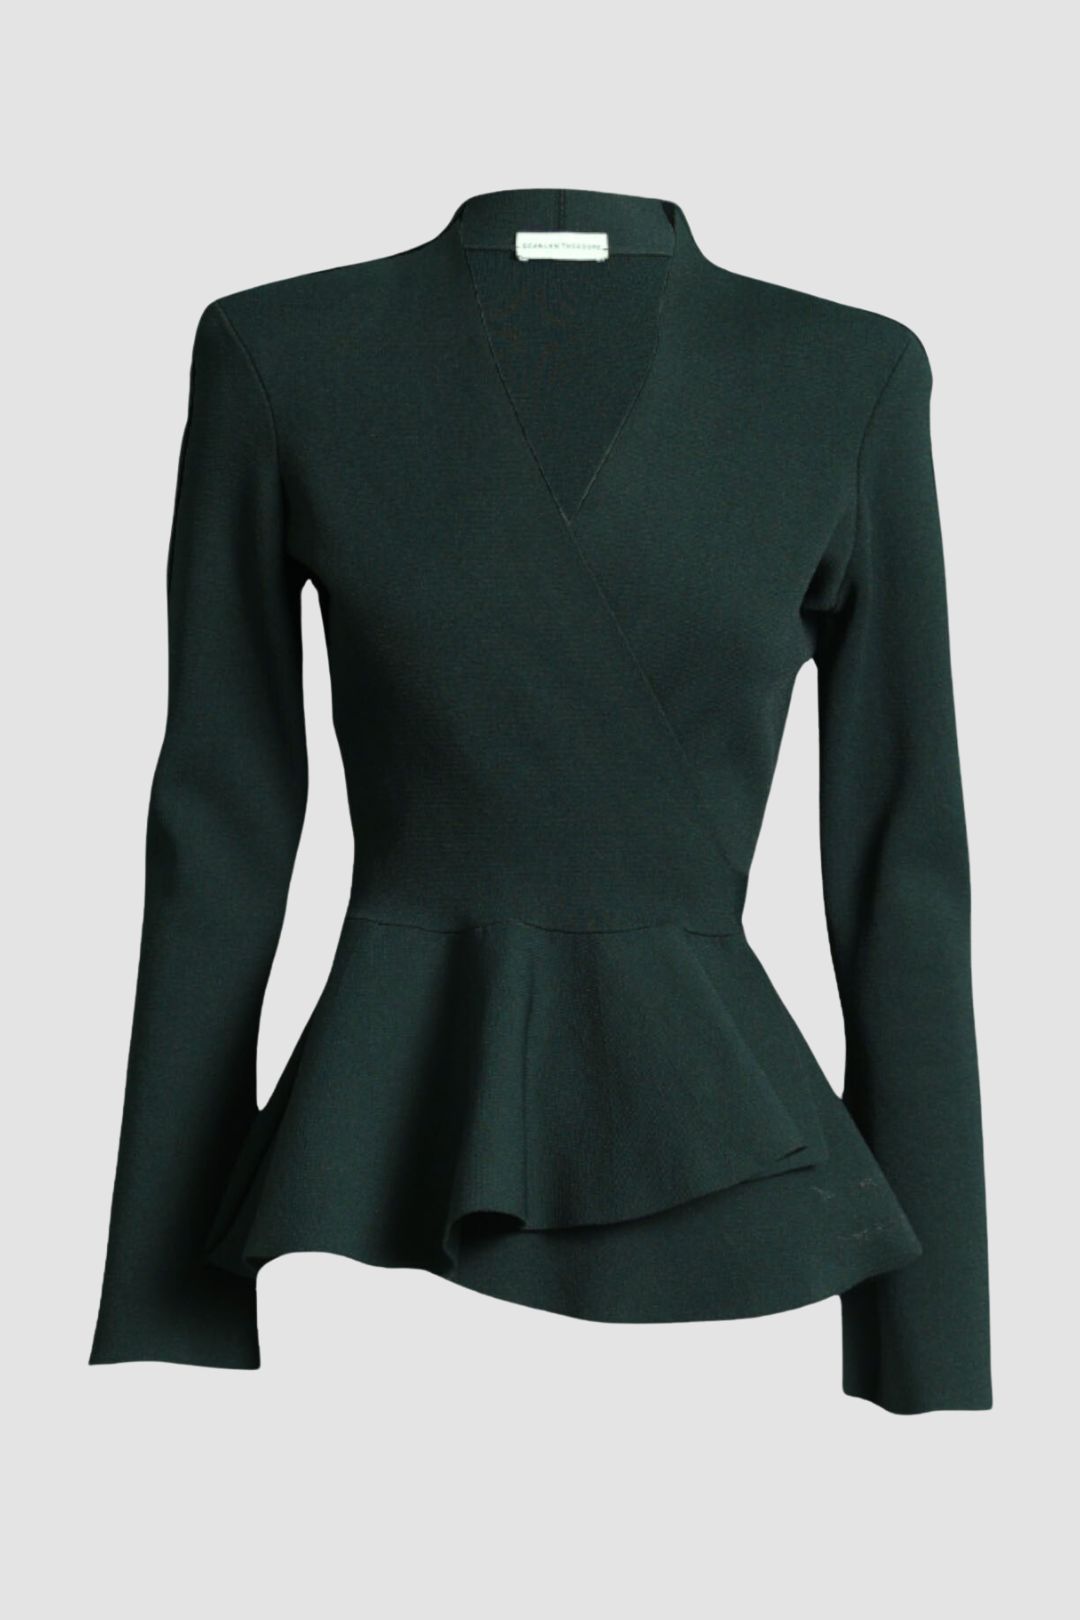 Scanlan Theodore Crepe Wrap Jacket in Forest Green